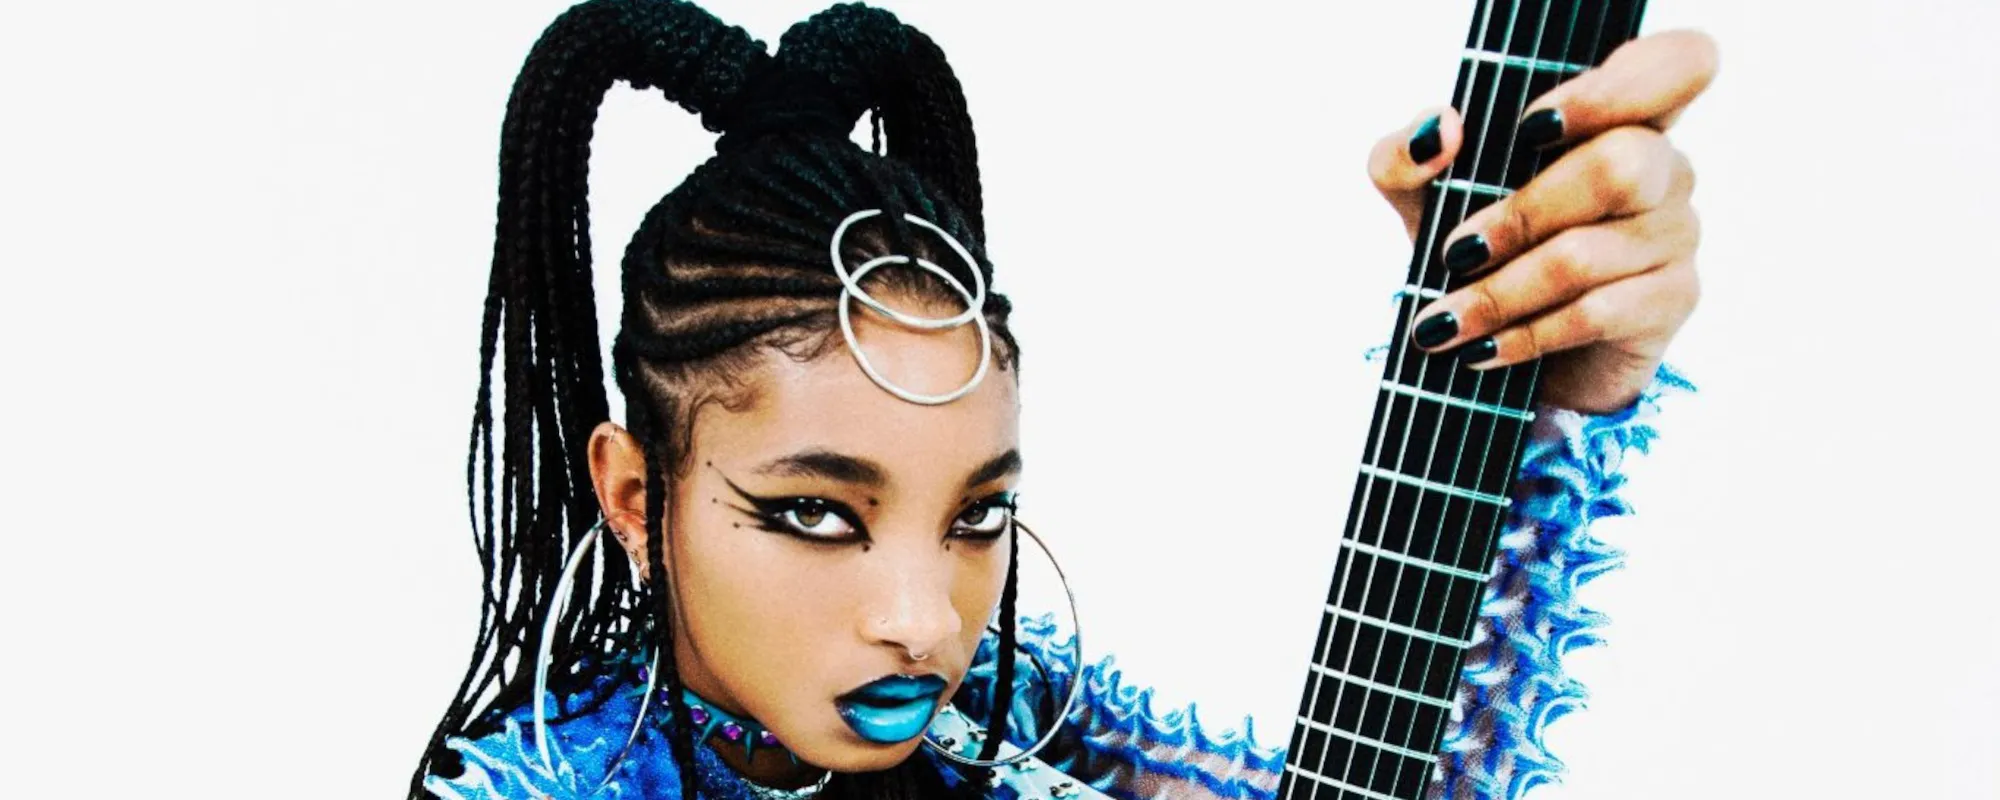 Willow Smith Pulls Out of Billie Eilish Tour Due to “Production Limitations”